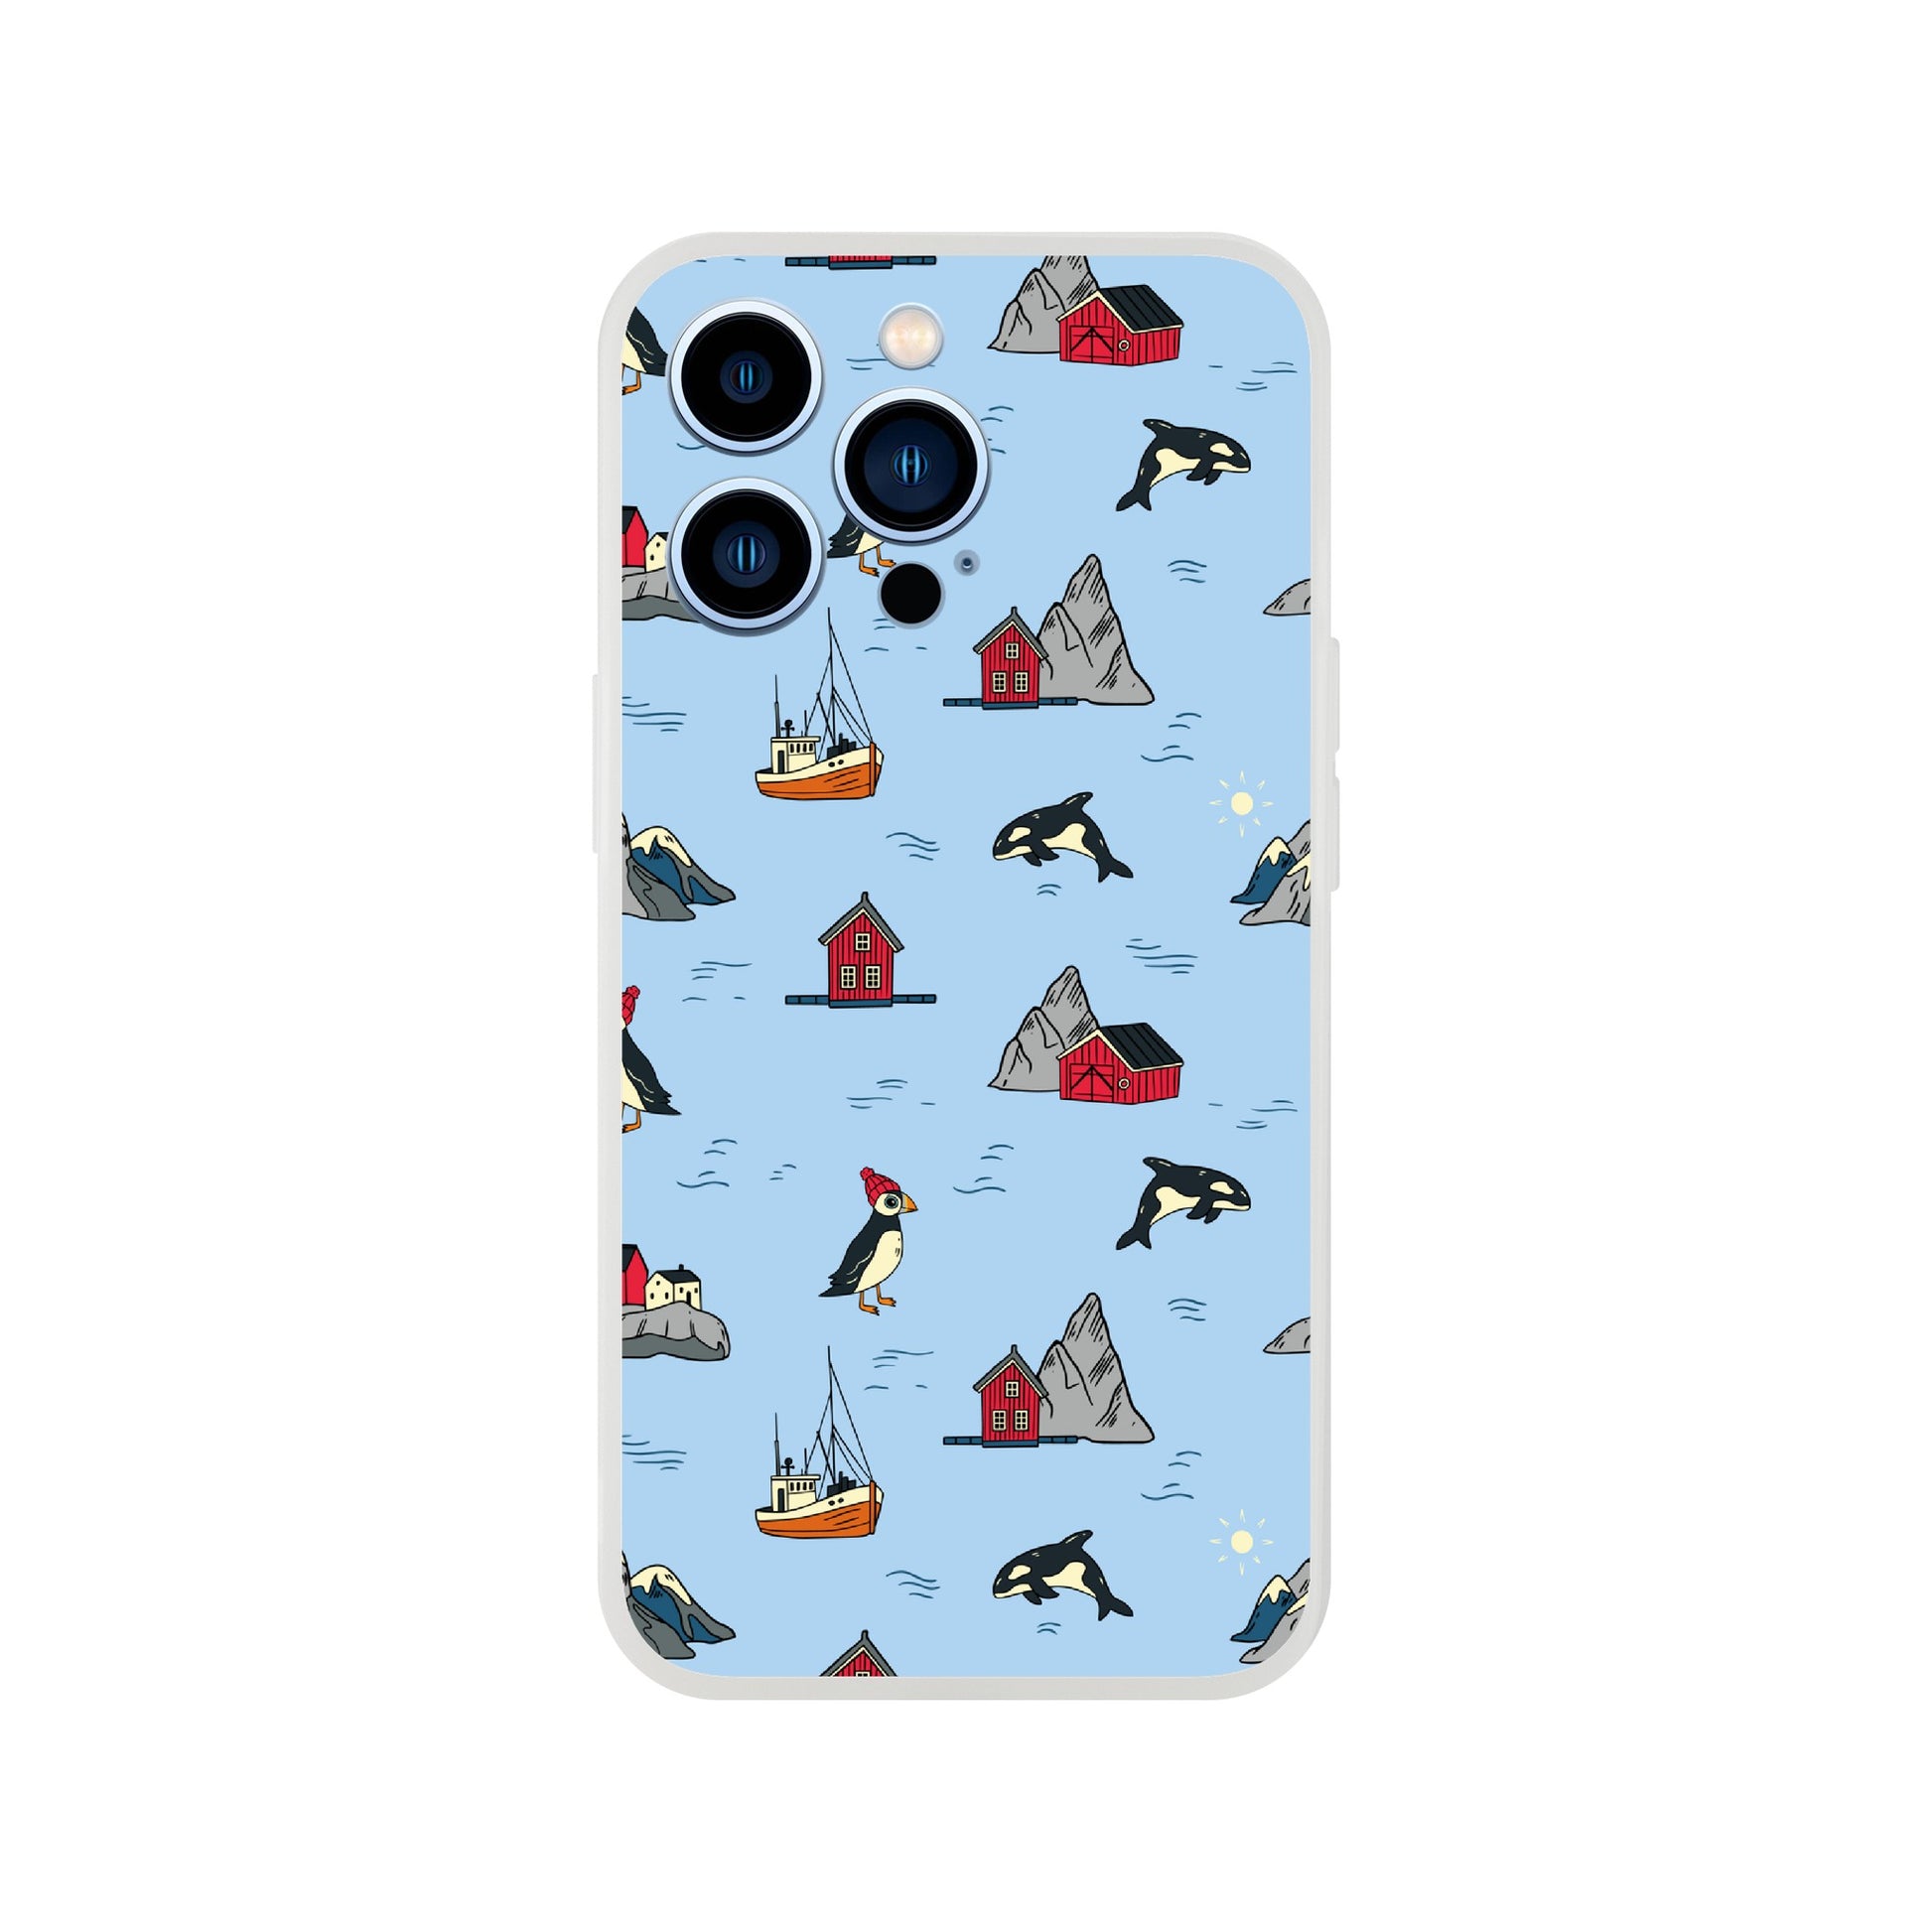 Puffin and orca phone cover